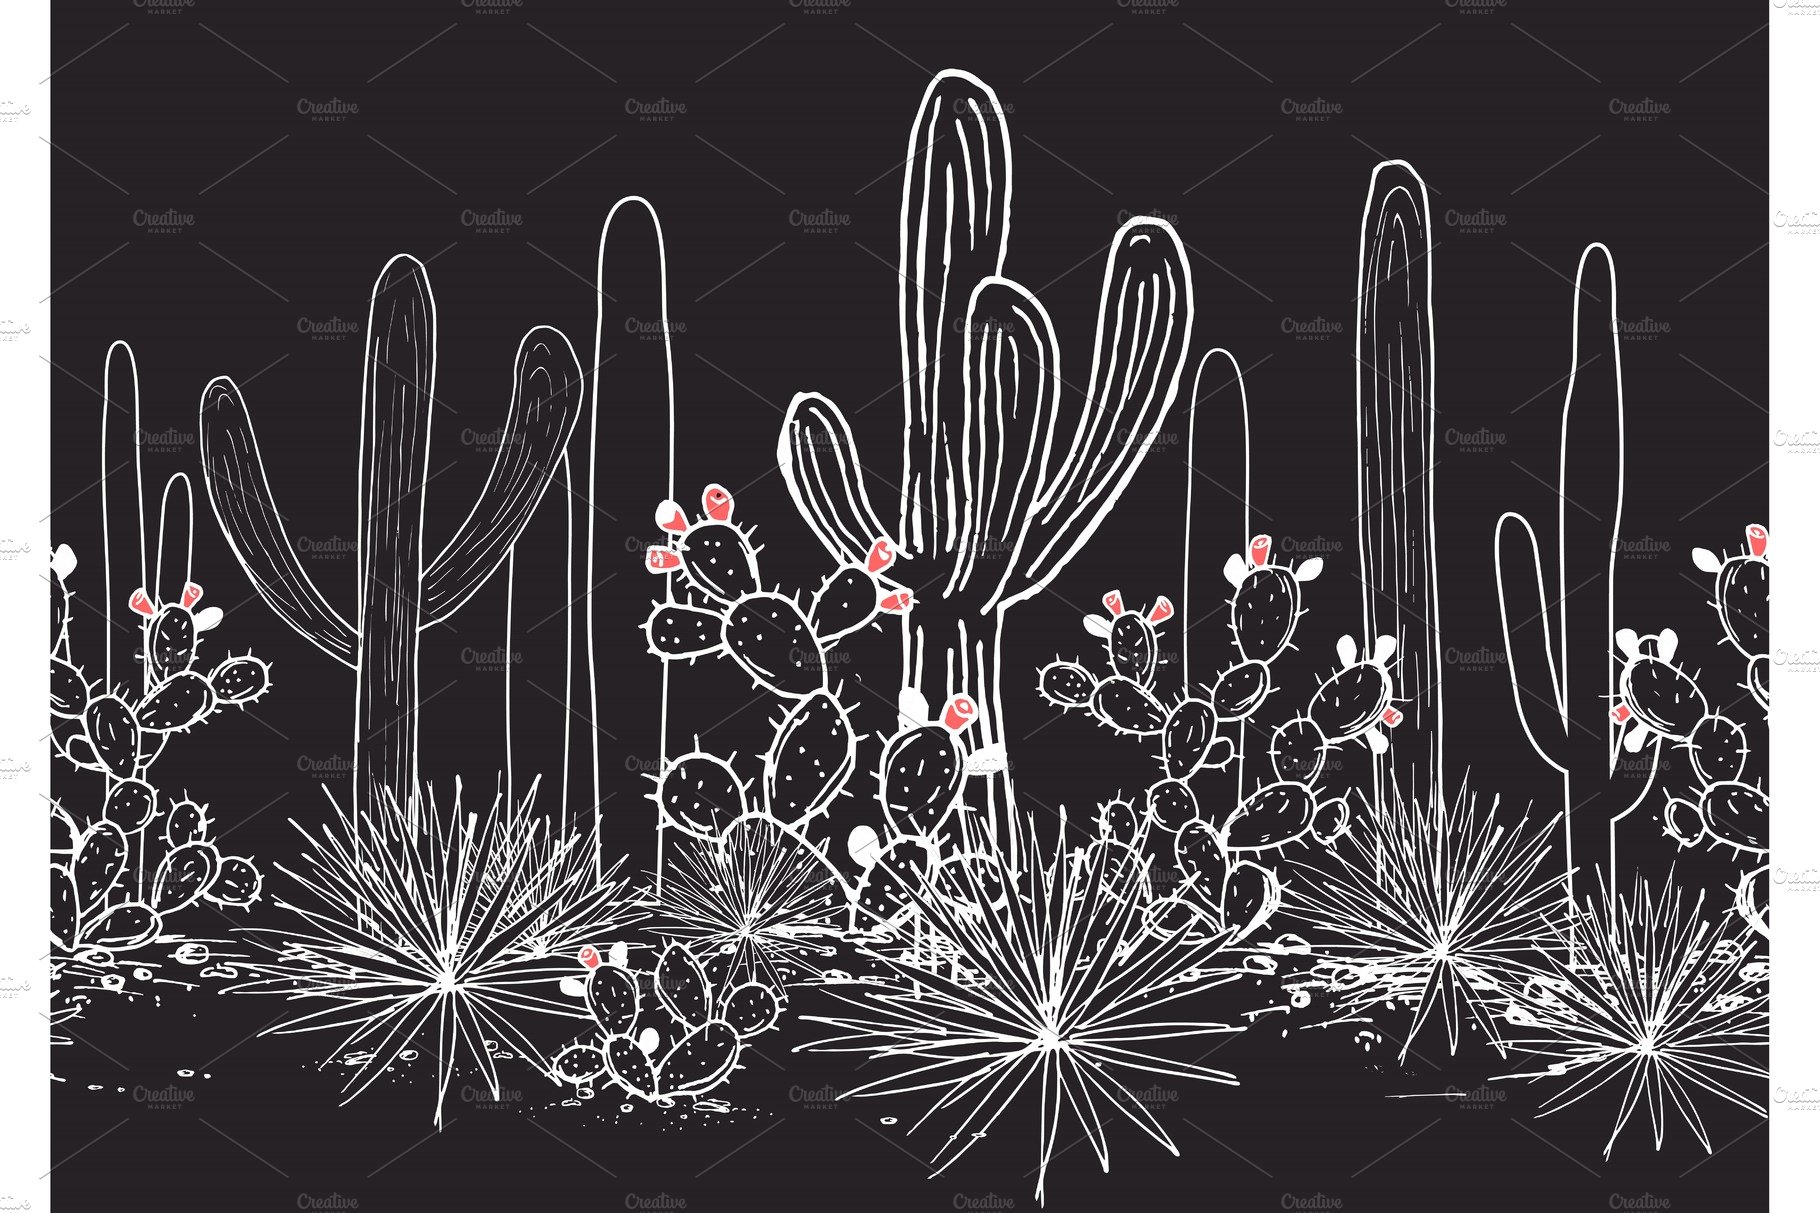 Black and white drawing of cactus plants.